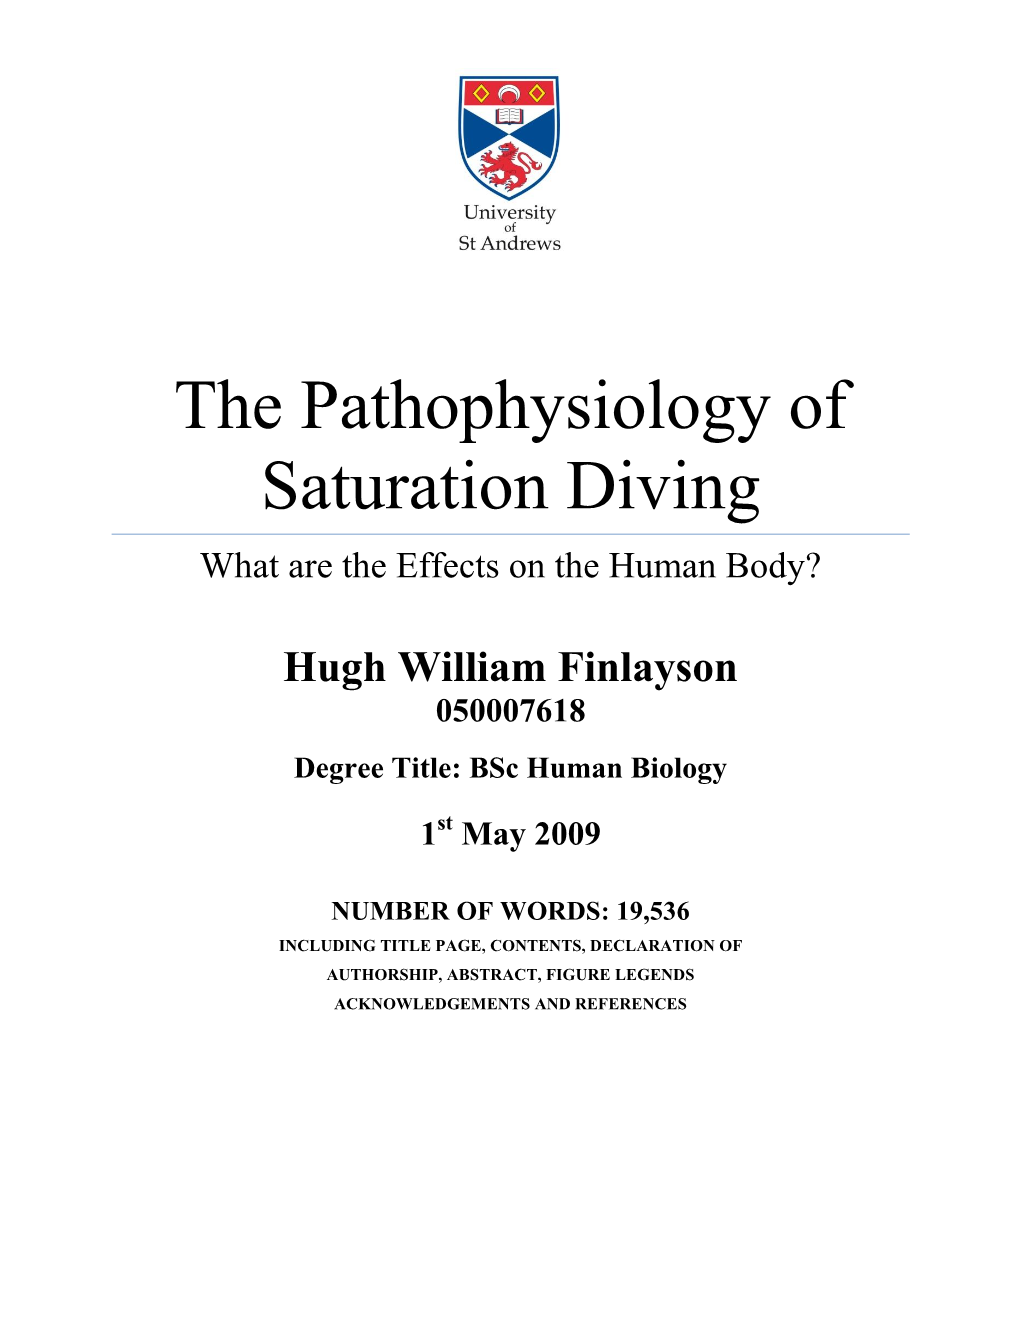 The Pathophysiology of Saturation Diving. What Are the Effects on The